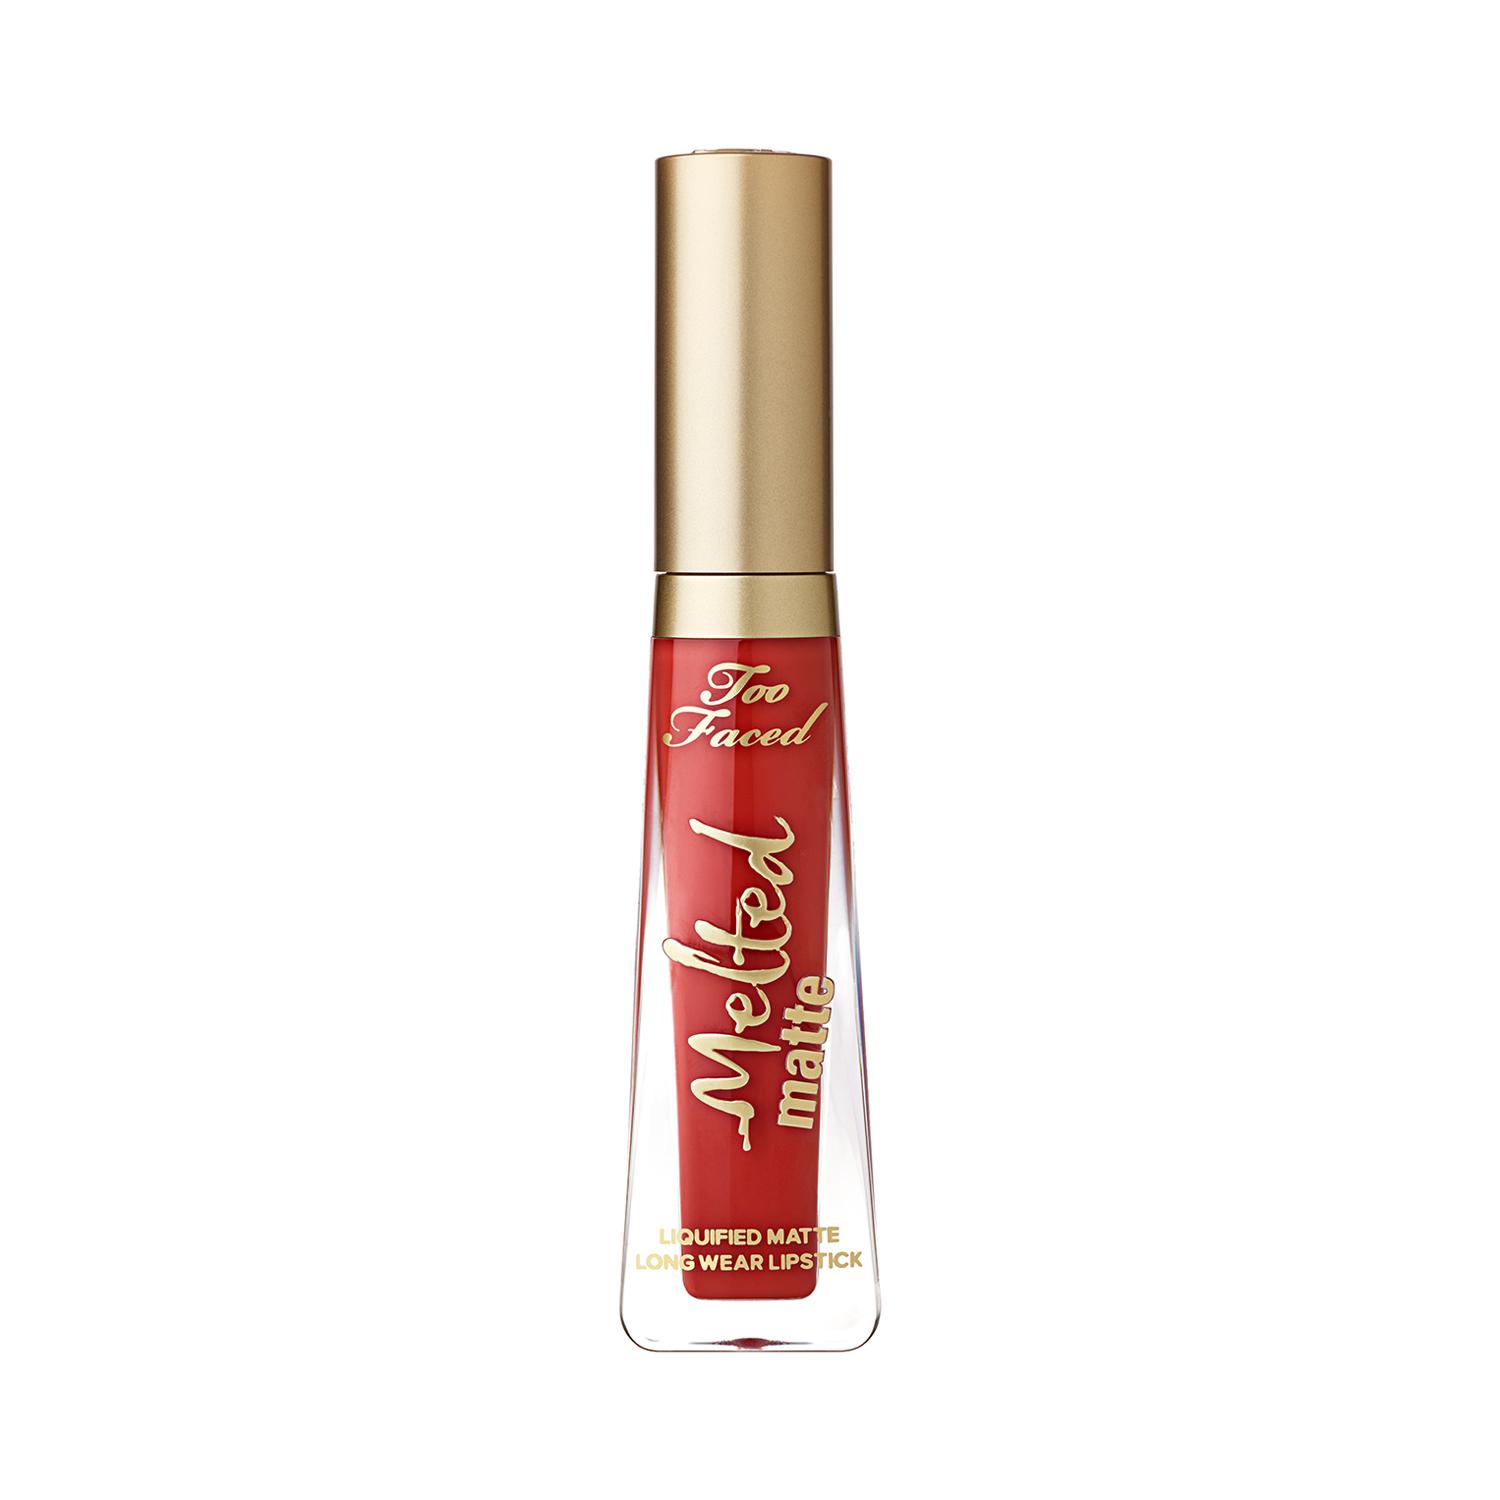 Too Faced Melted Matte Lipstick - Nasty Girl (7ml)